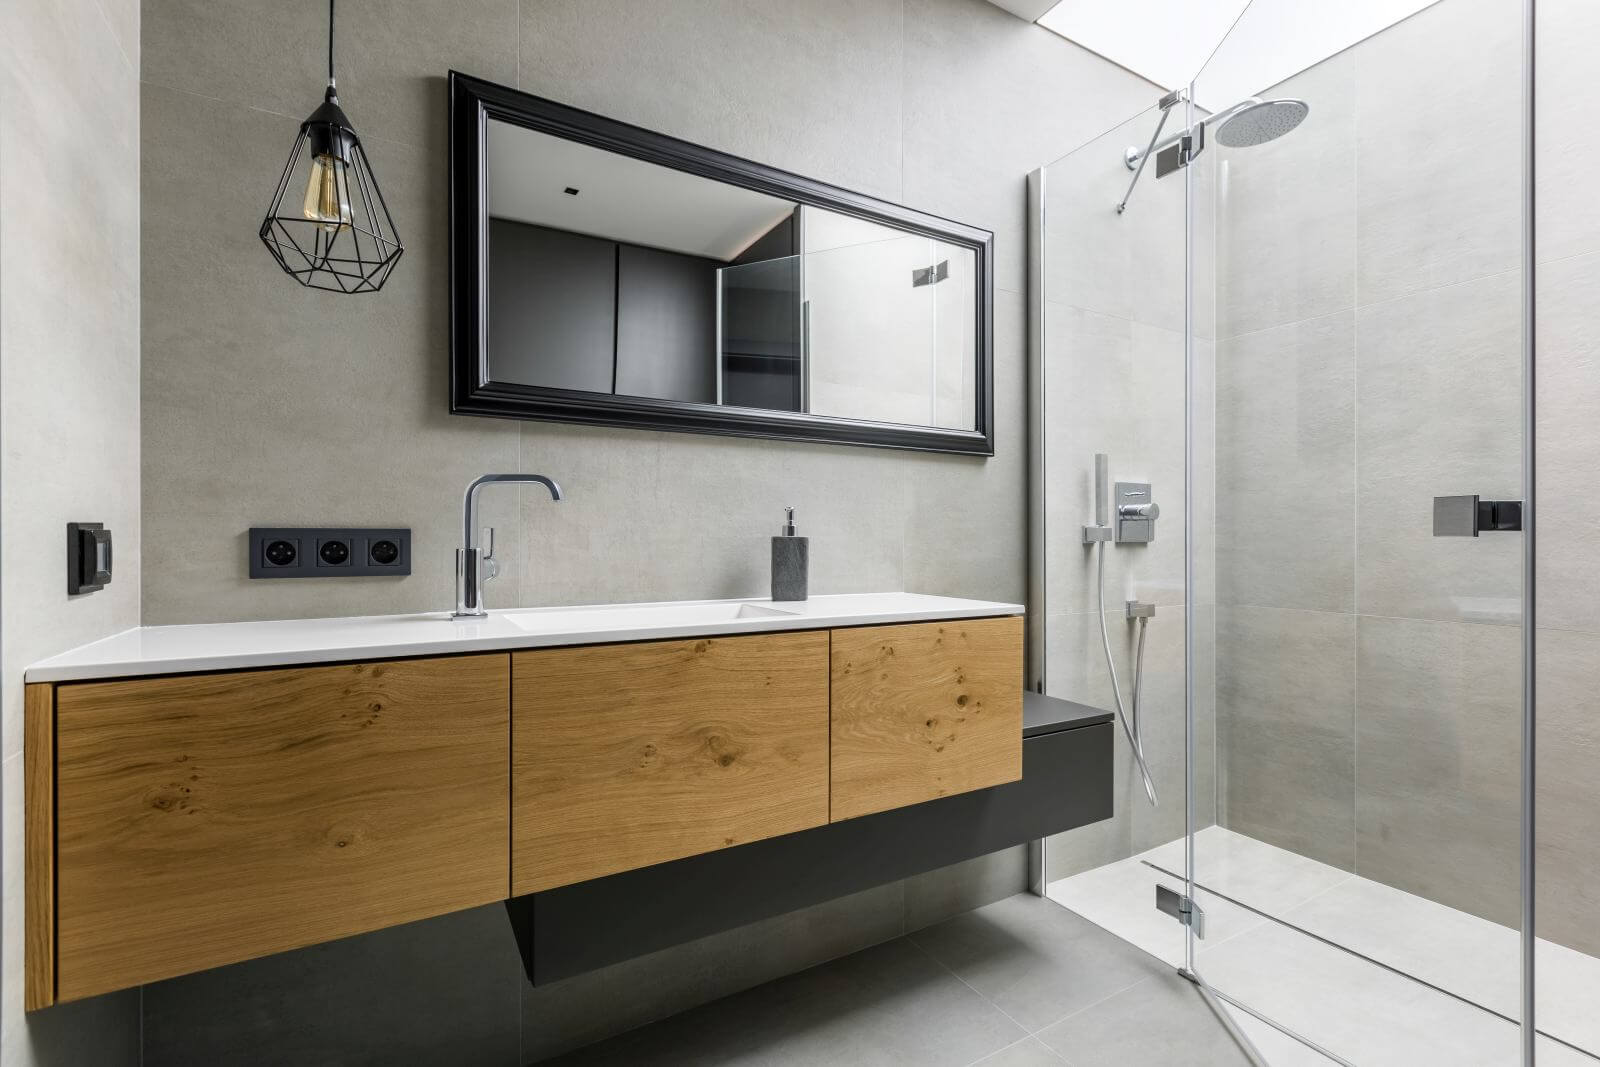 Modern, gray bathroom with walk in shower, mirror and countertop basin